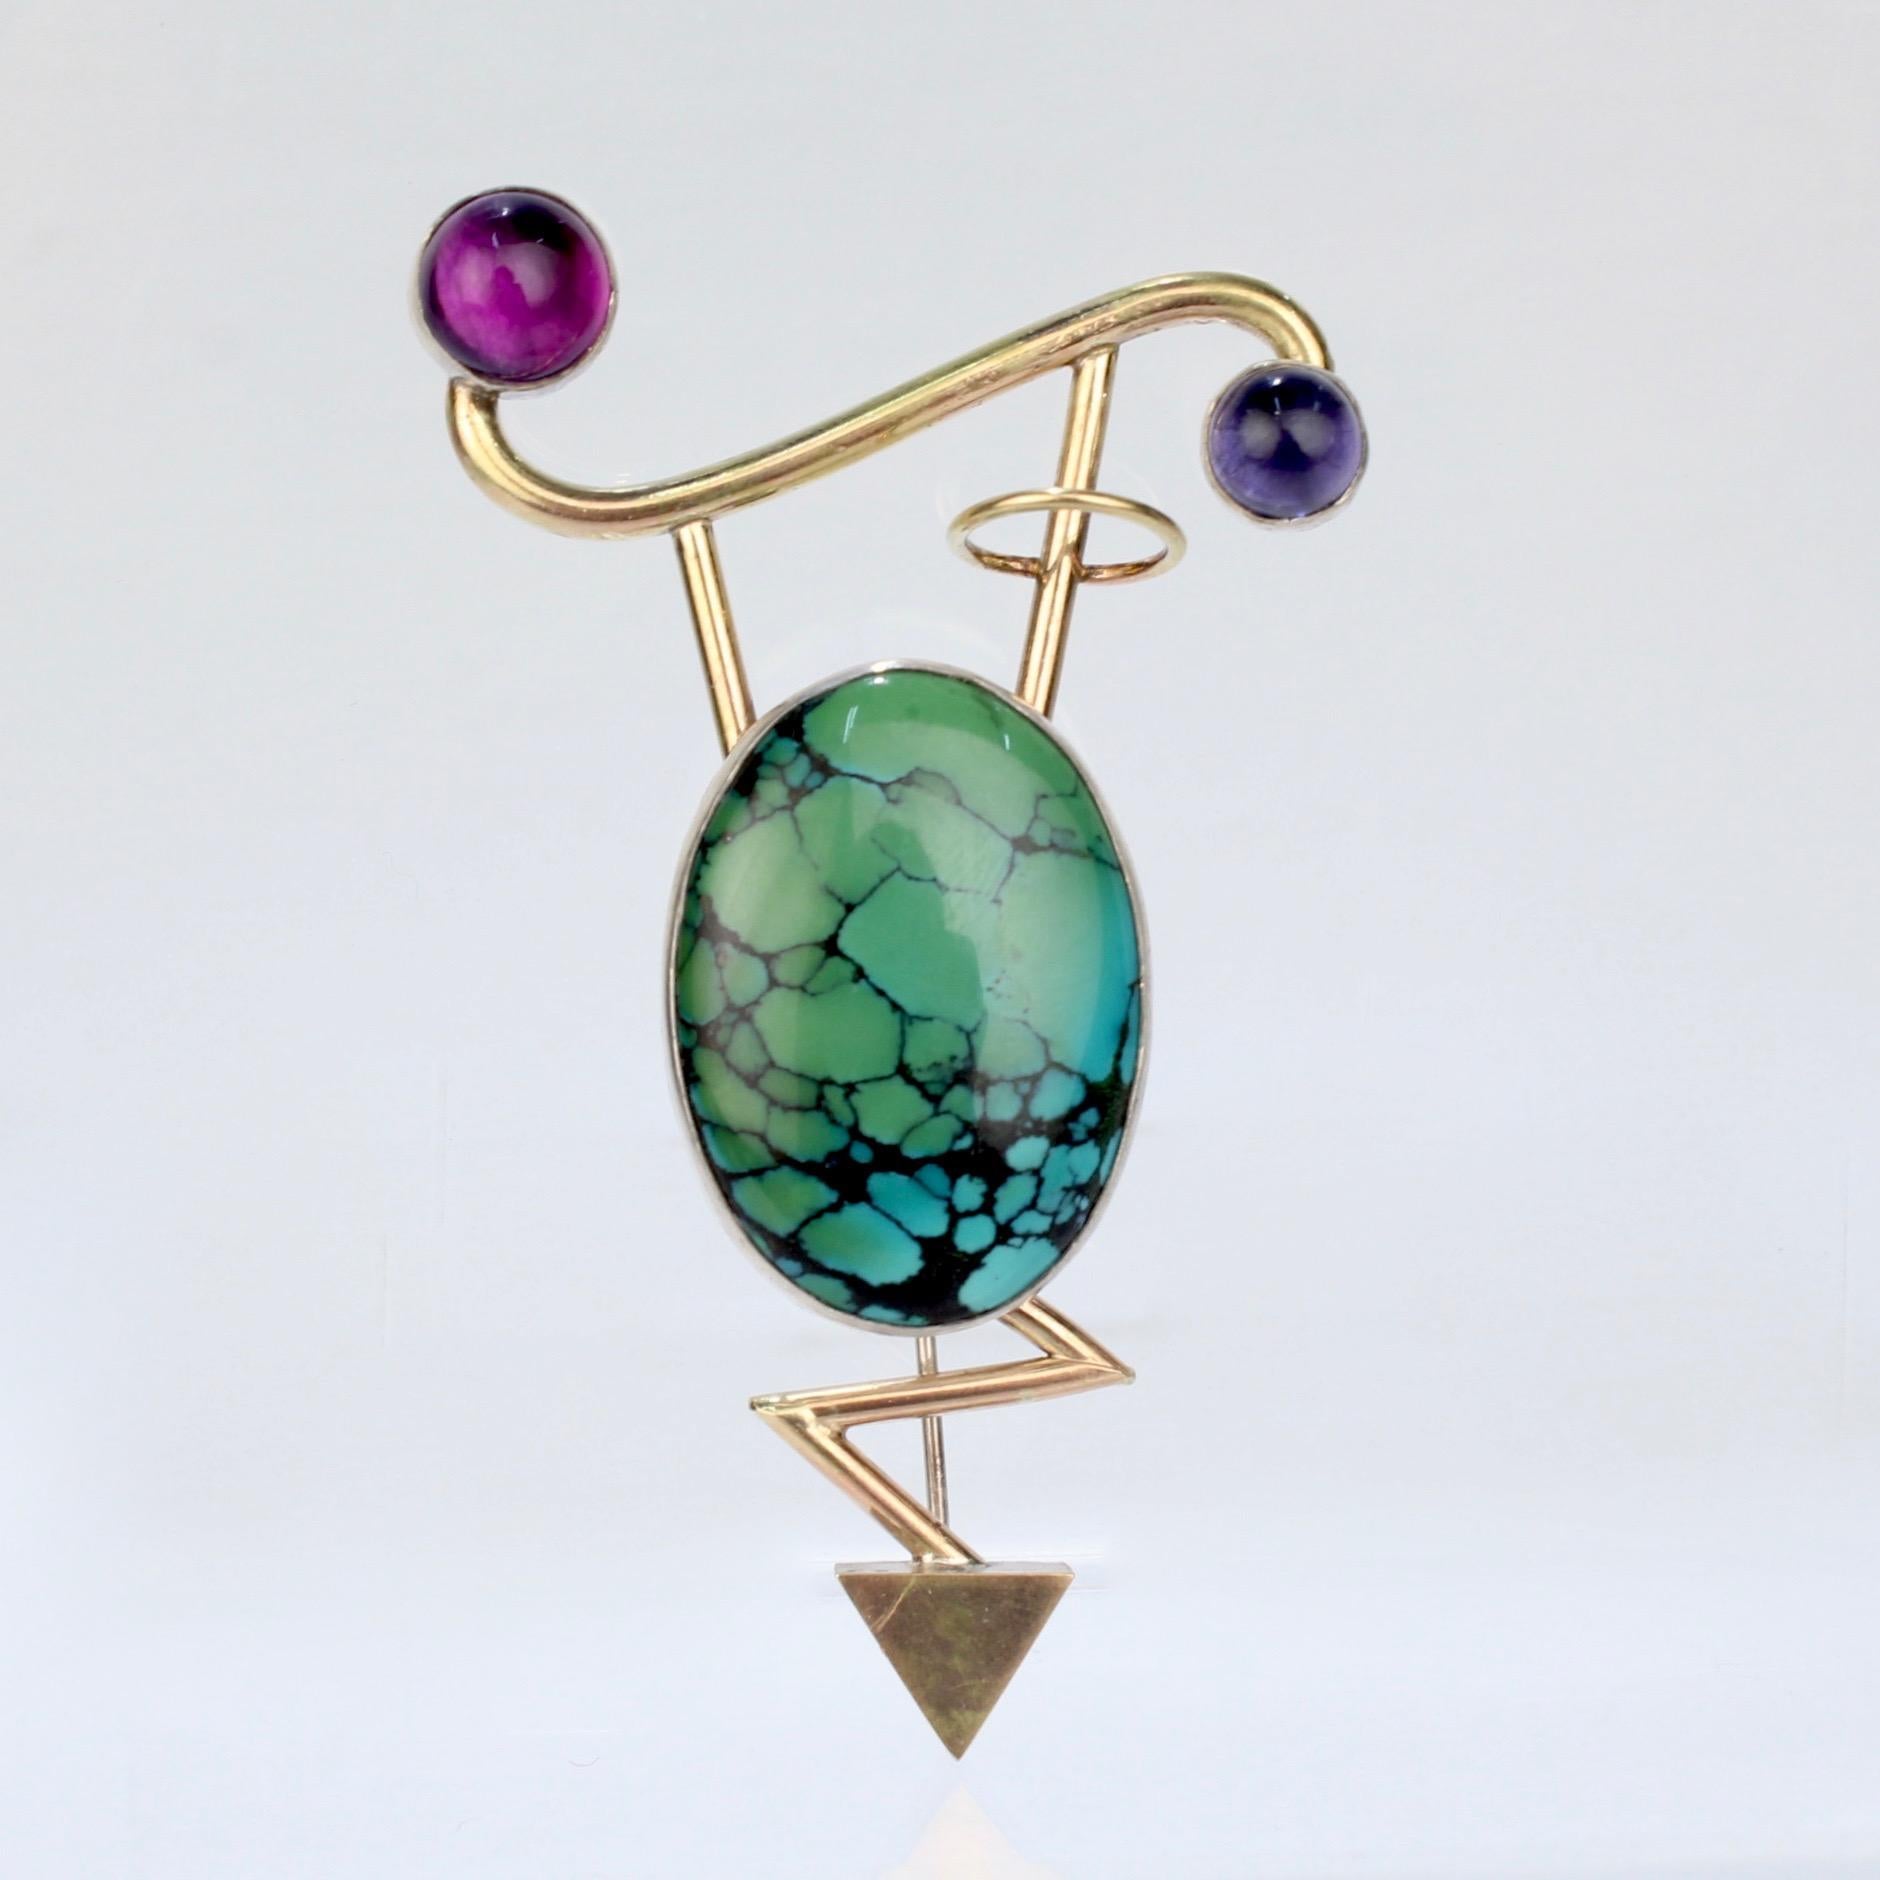 A very fine Retro demi-parure of earrings and a brooch by Yumi Ueno.

Comprised of sterling silver and 14k gold and set with large calico spider web matrix turquoise cabochons. The brooch also has a tourmaline and an amethyst cabochon flanking each